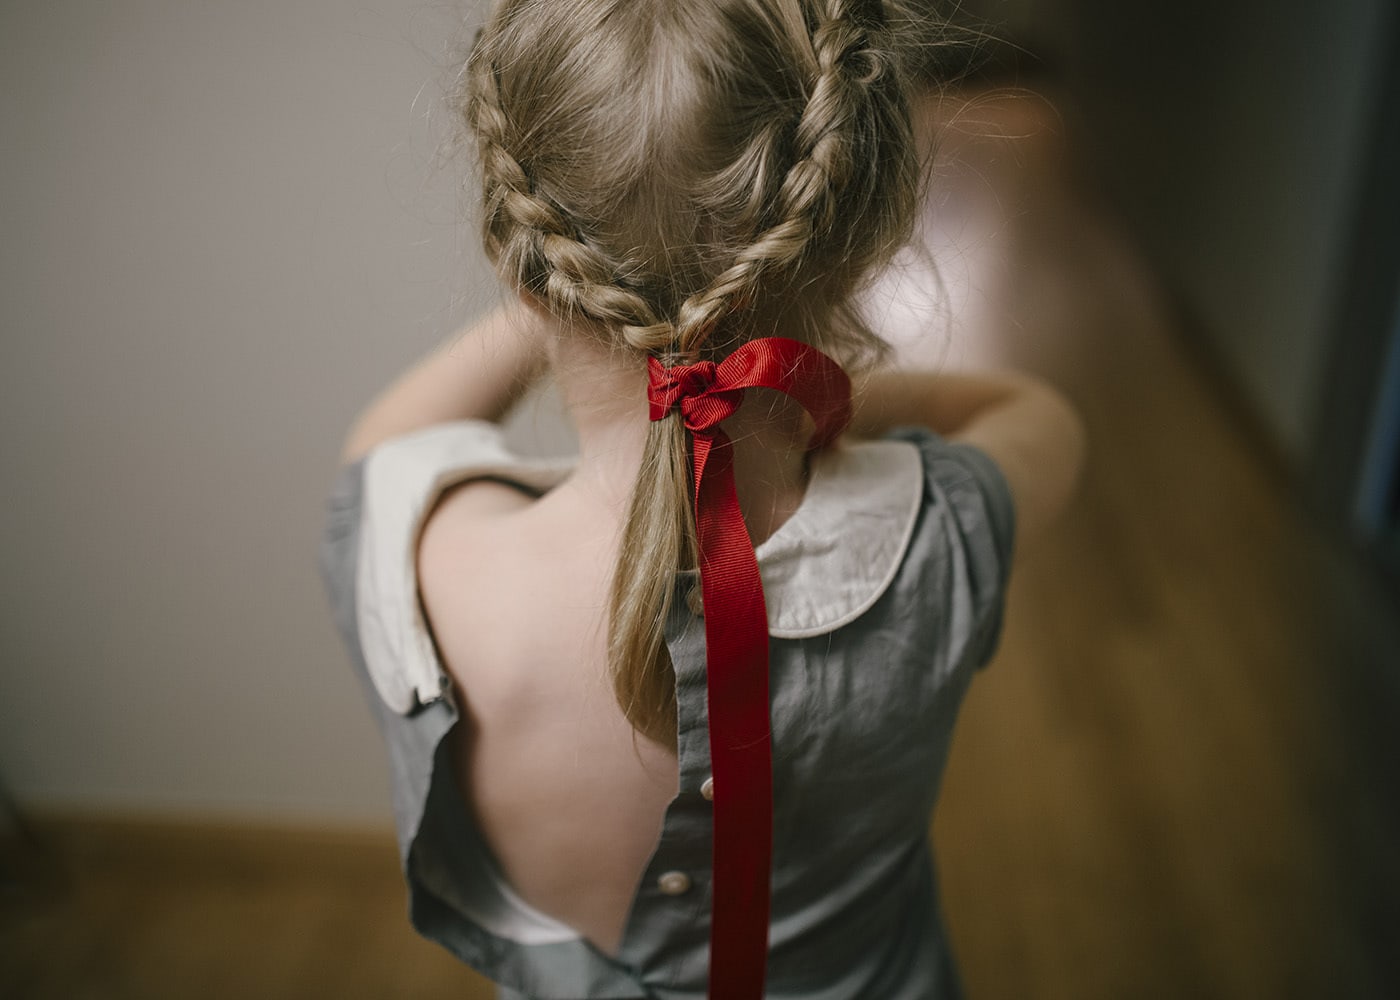 Back View of a little Girl in a red ribbon and braided hair with the back of her vintage dress unbuttoned.